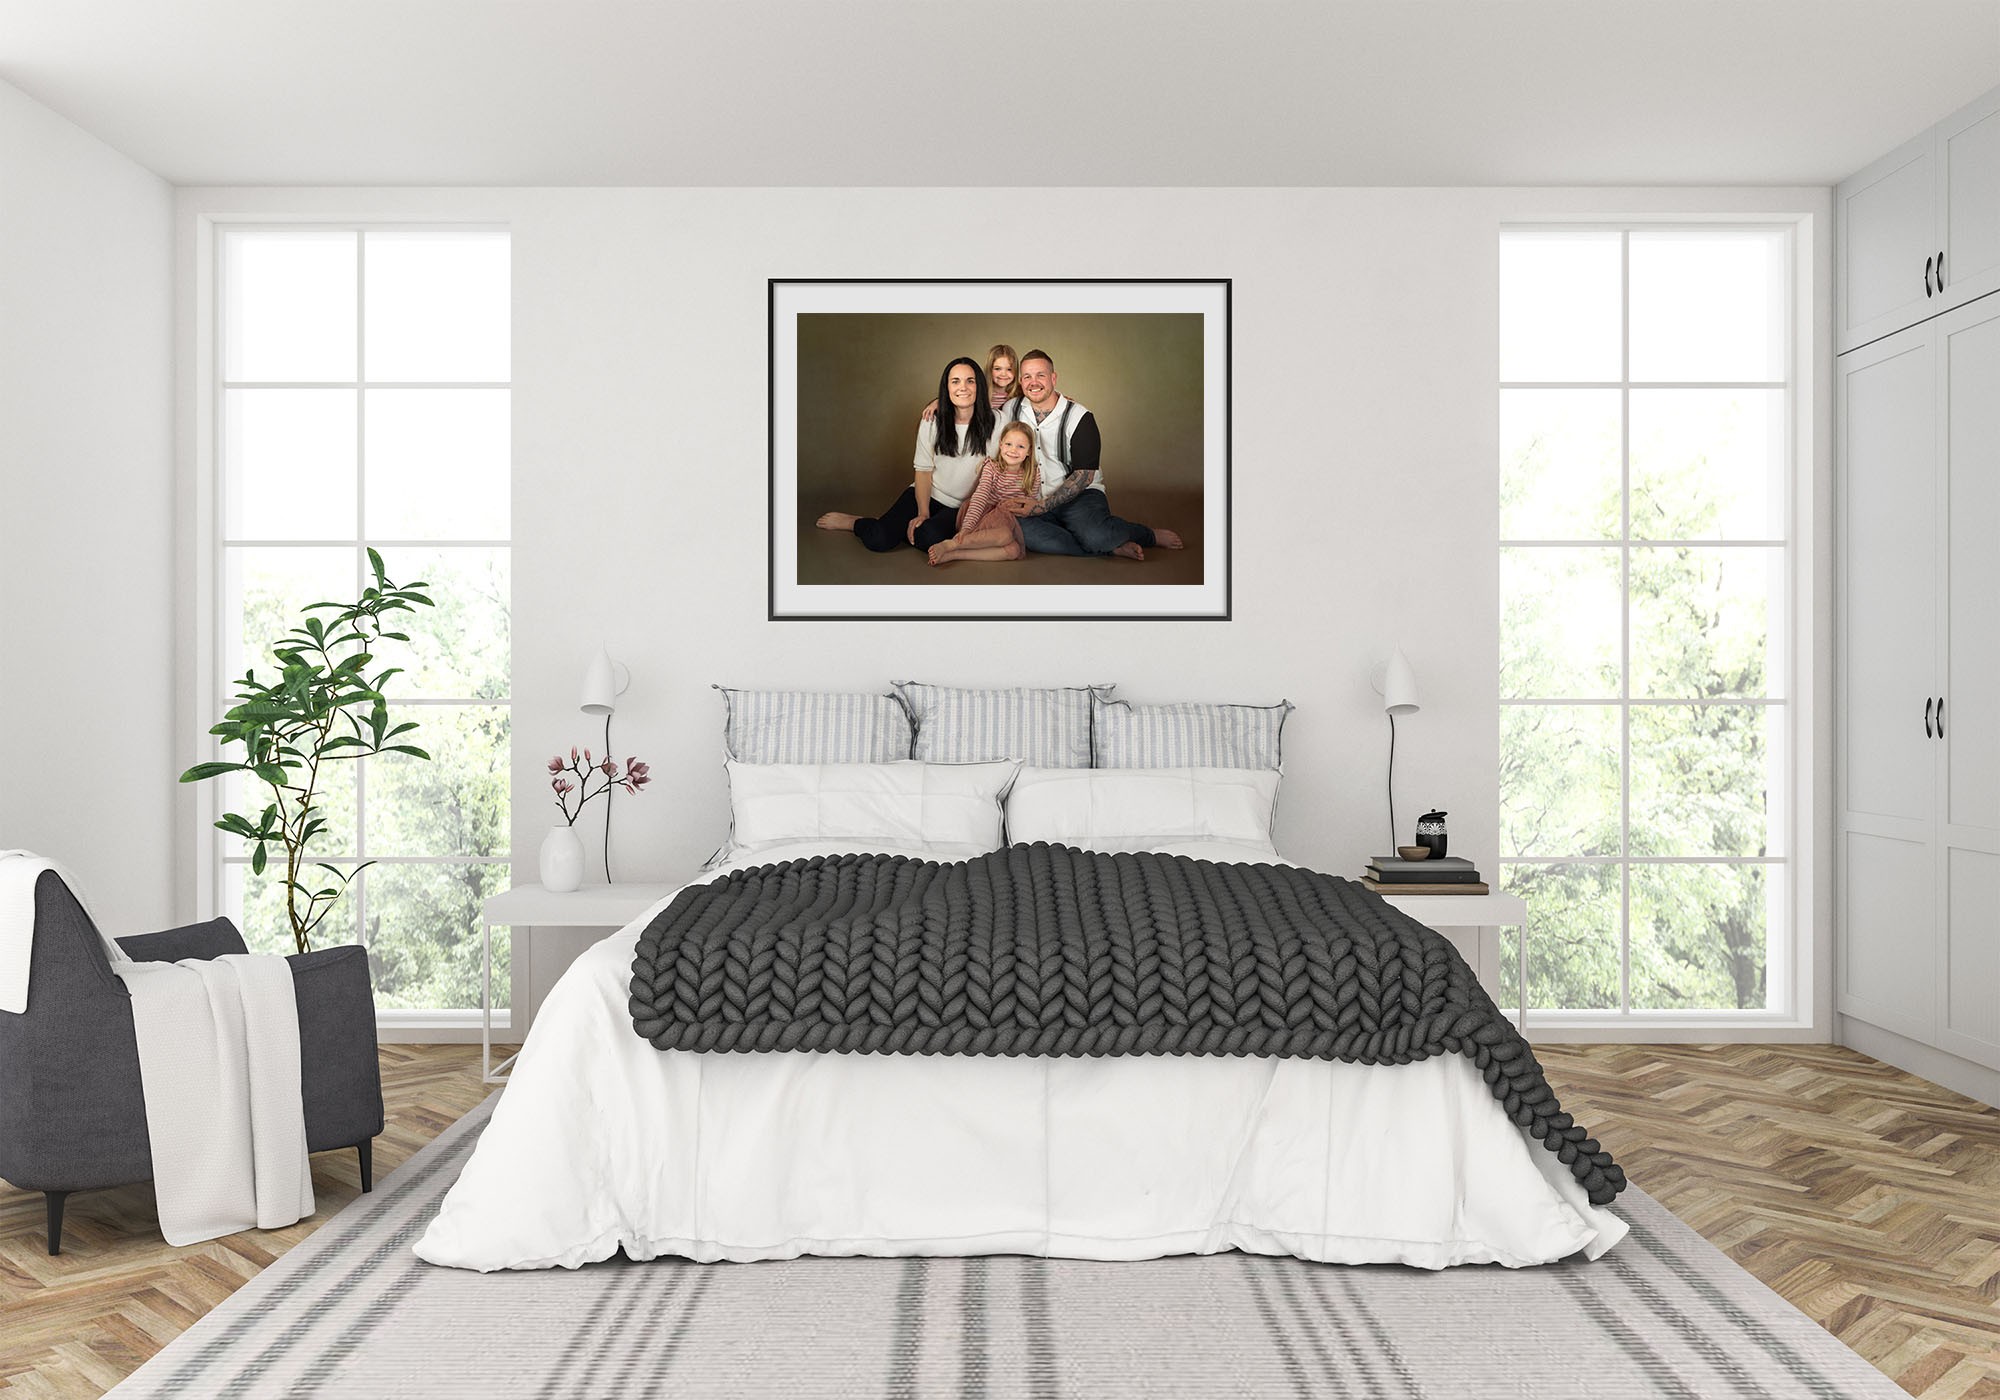 Beautiful wall art for your home Wirral family Photographer